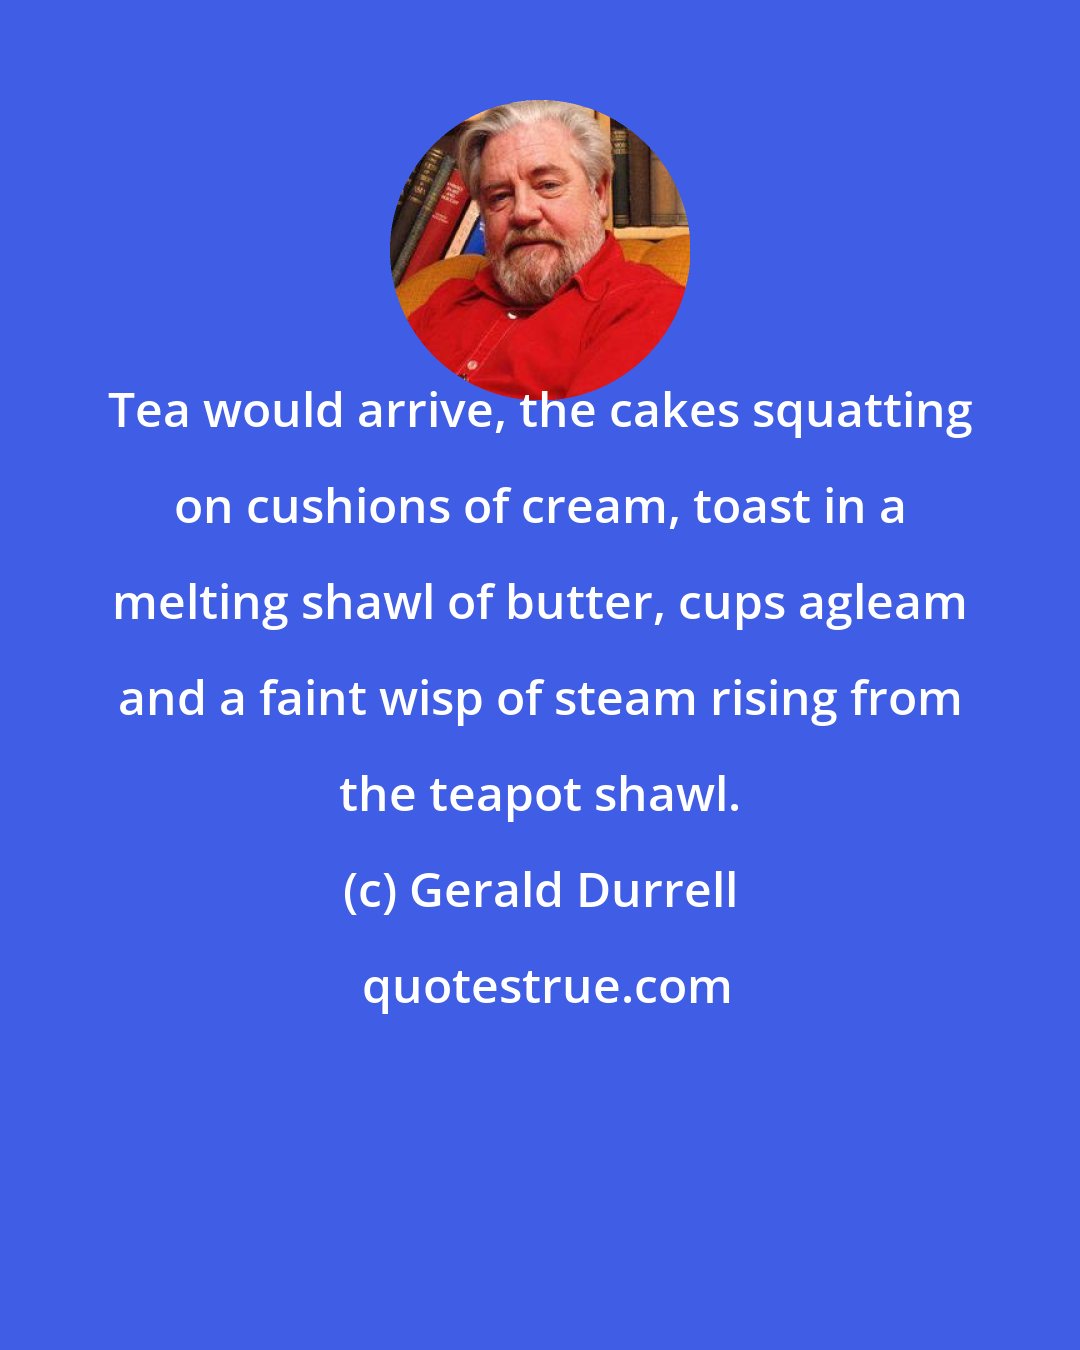 Gerald Durrell: Tea would arrive, the cakes squatting on cushions of cream, toast in a melting shawl of butter, cups agleam and a faint wisp of steam rising from the teapot shawl.